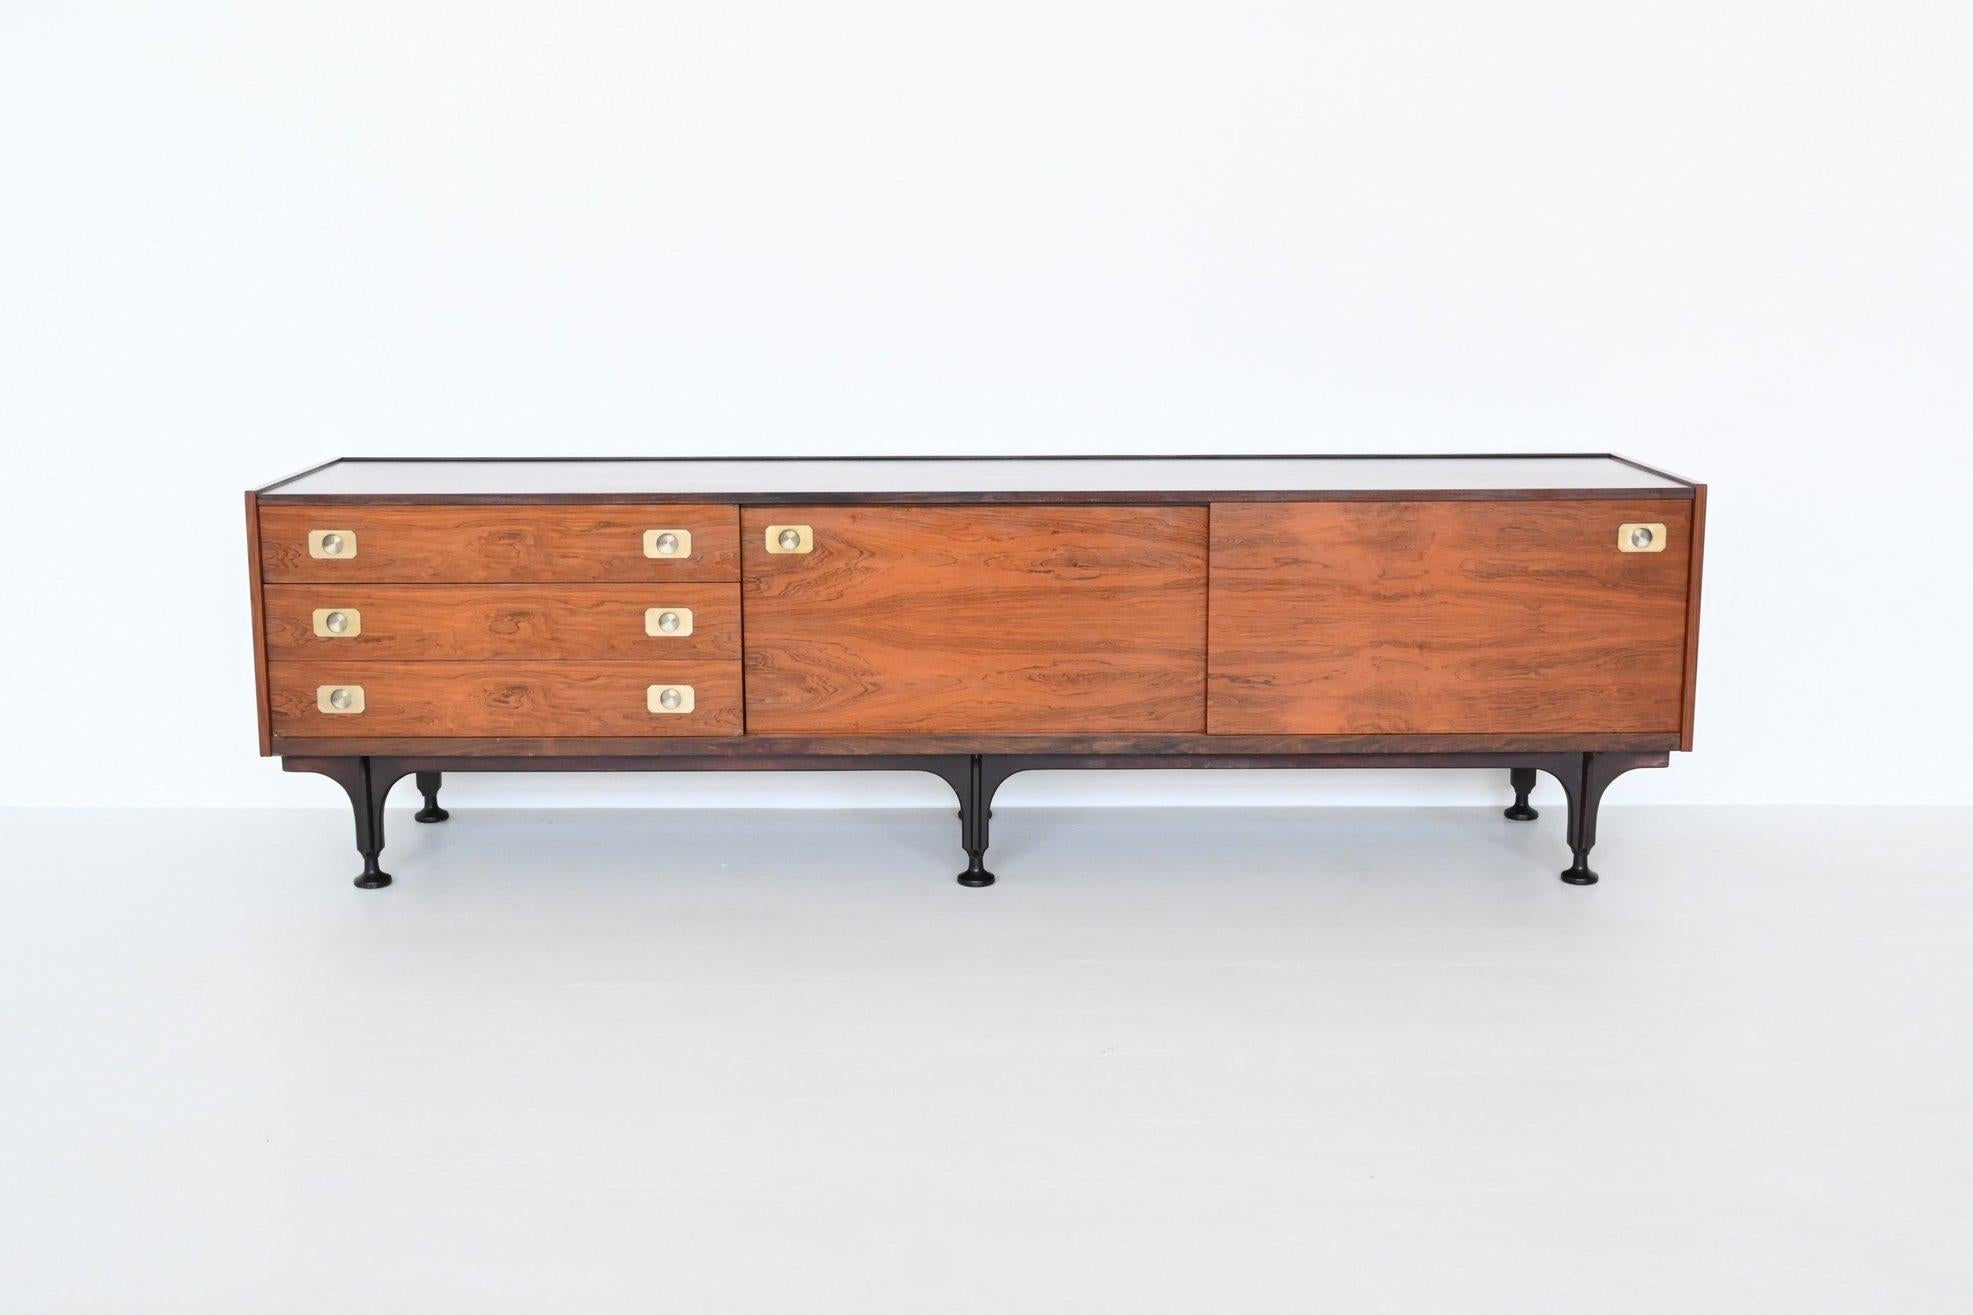 Beautiful shaped and well-crafted sideboard manufactured by Stildomus, Italy 1960. This very nice low sideboard is executed in veneered rosewood supported by a black lacquered wooden frame. It has three drawers on the left and two sliding doors on